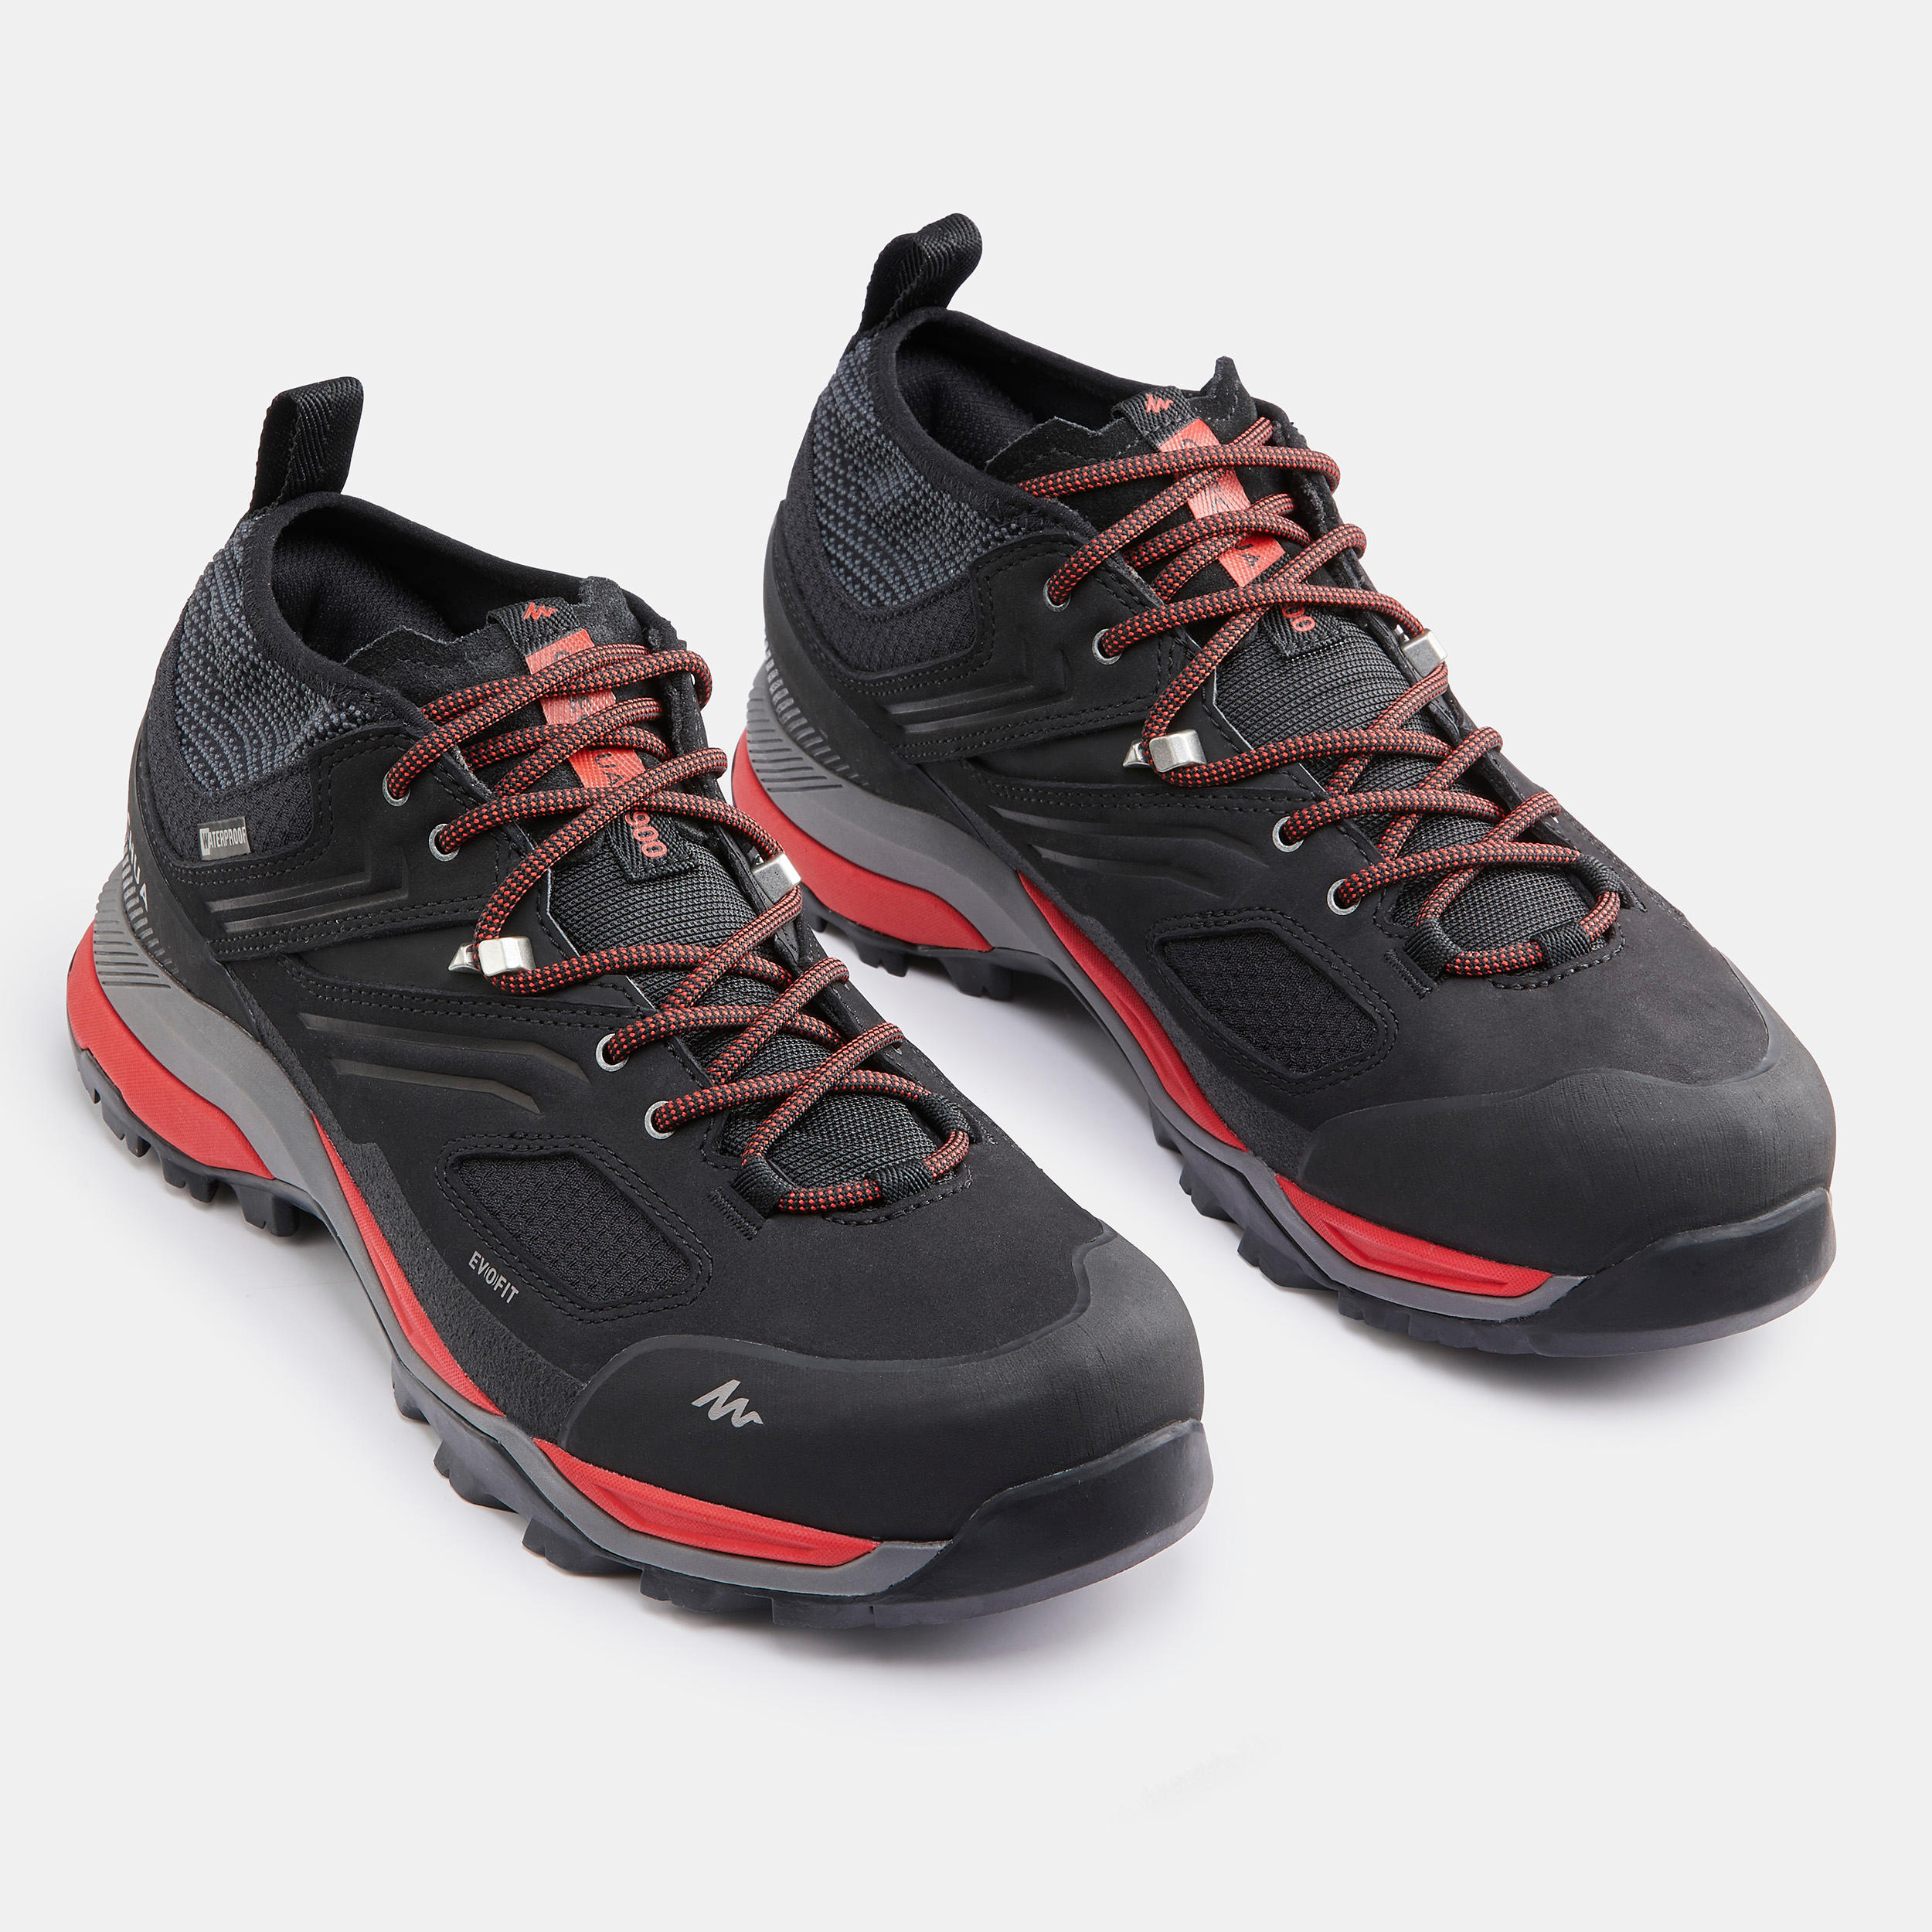 Men's waterproof mountain hiking shoes - MH900 - Black/Red 4/6